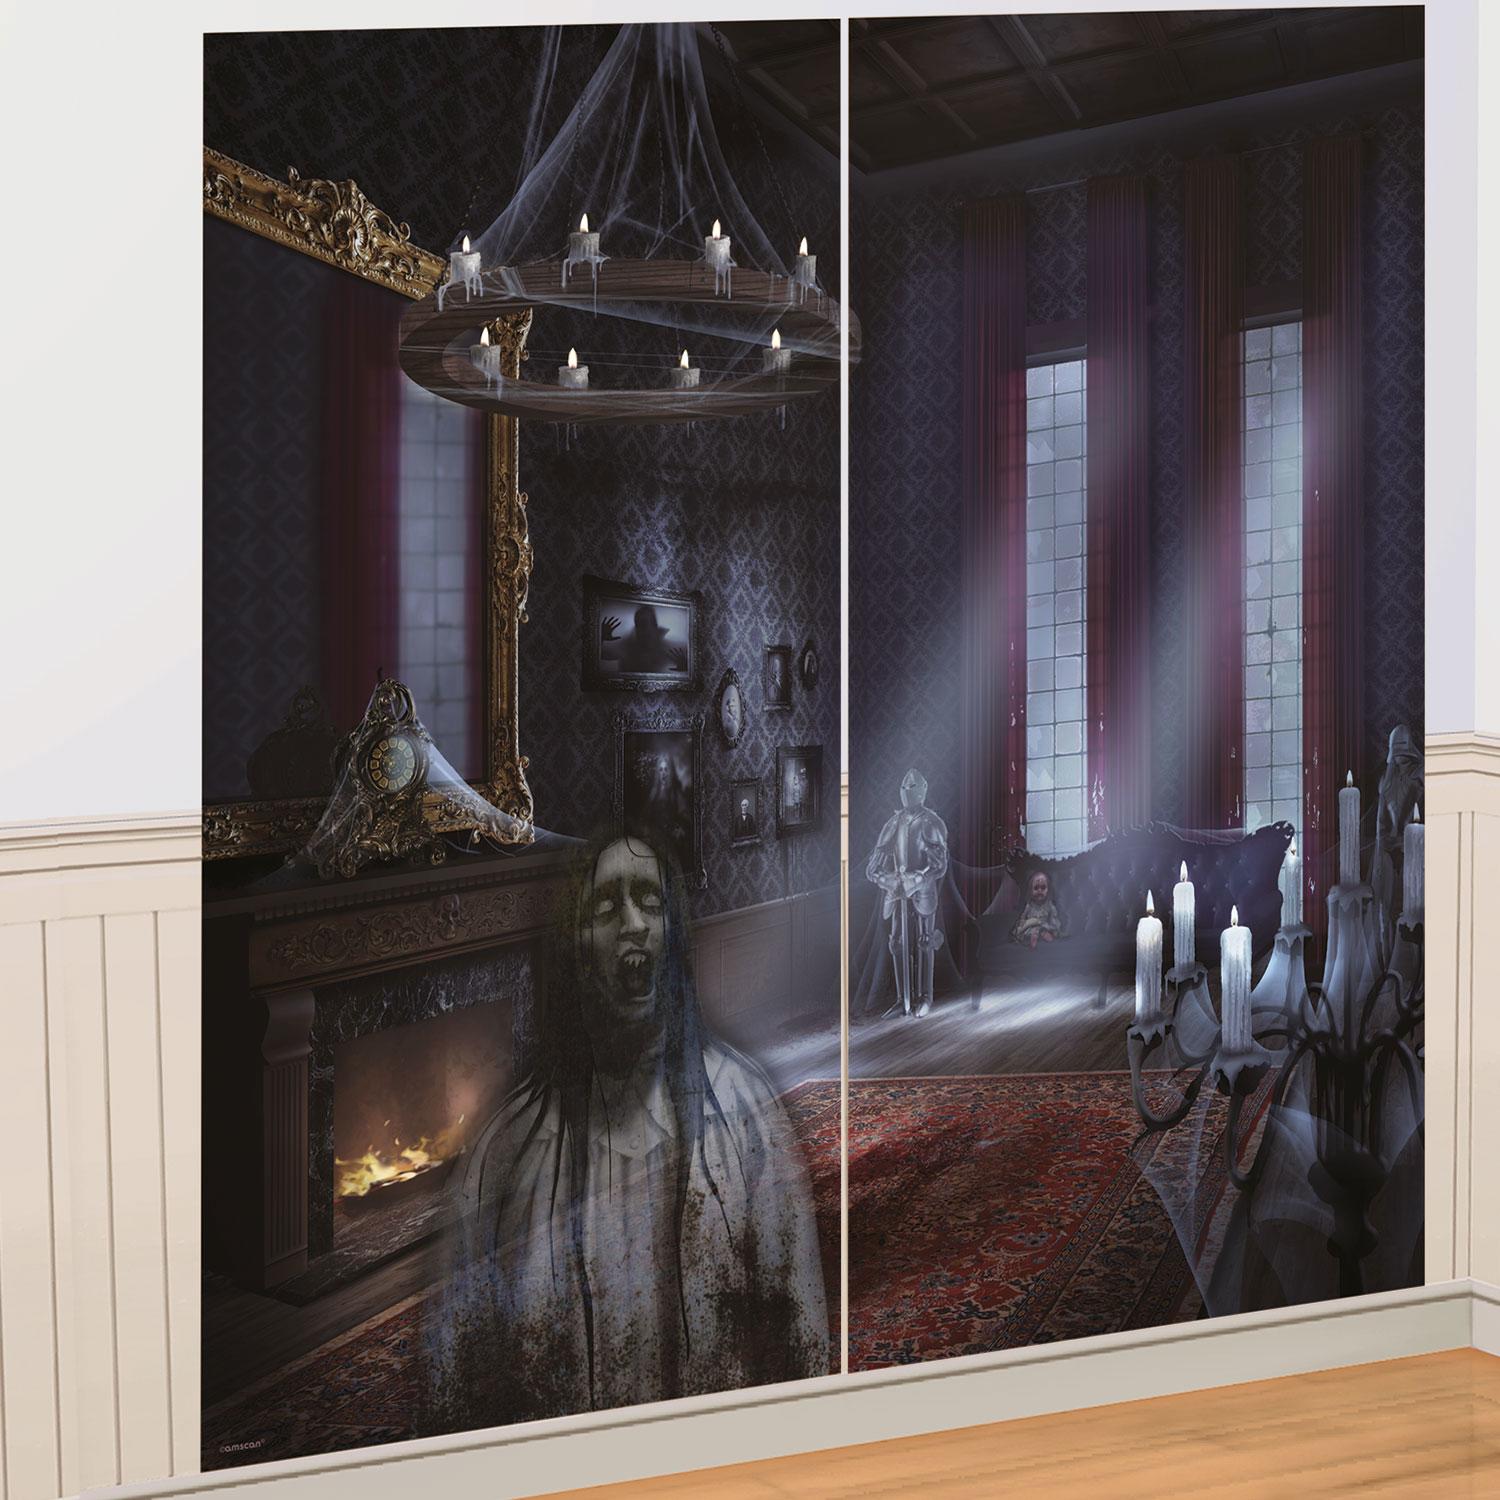 Dark Manor Wall Decoration Kit 1.65m x 1.65m by Amscan 670946 available here at Karnival Costumes online party shop